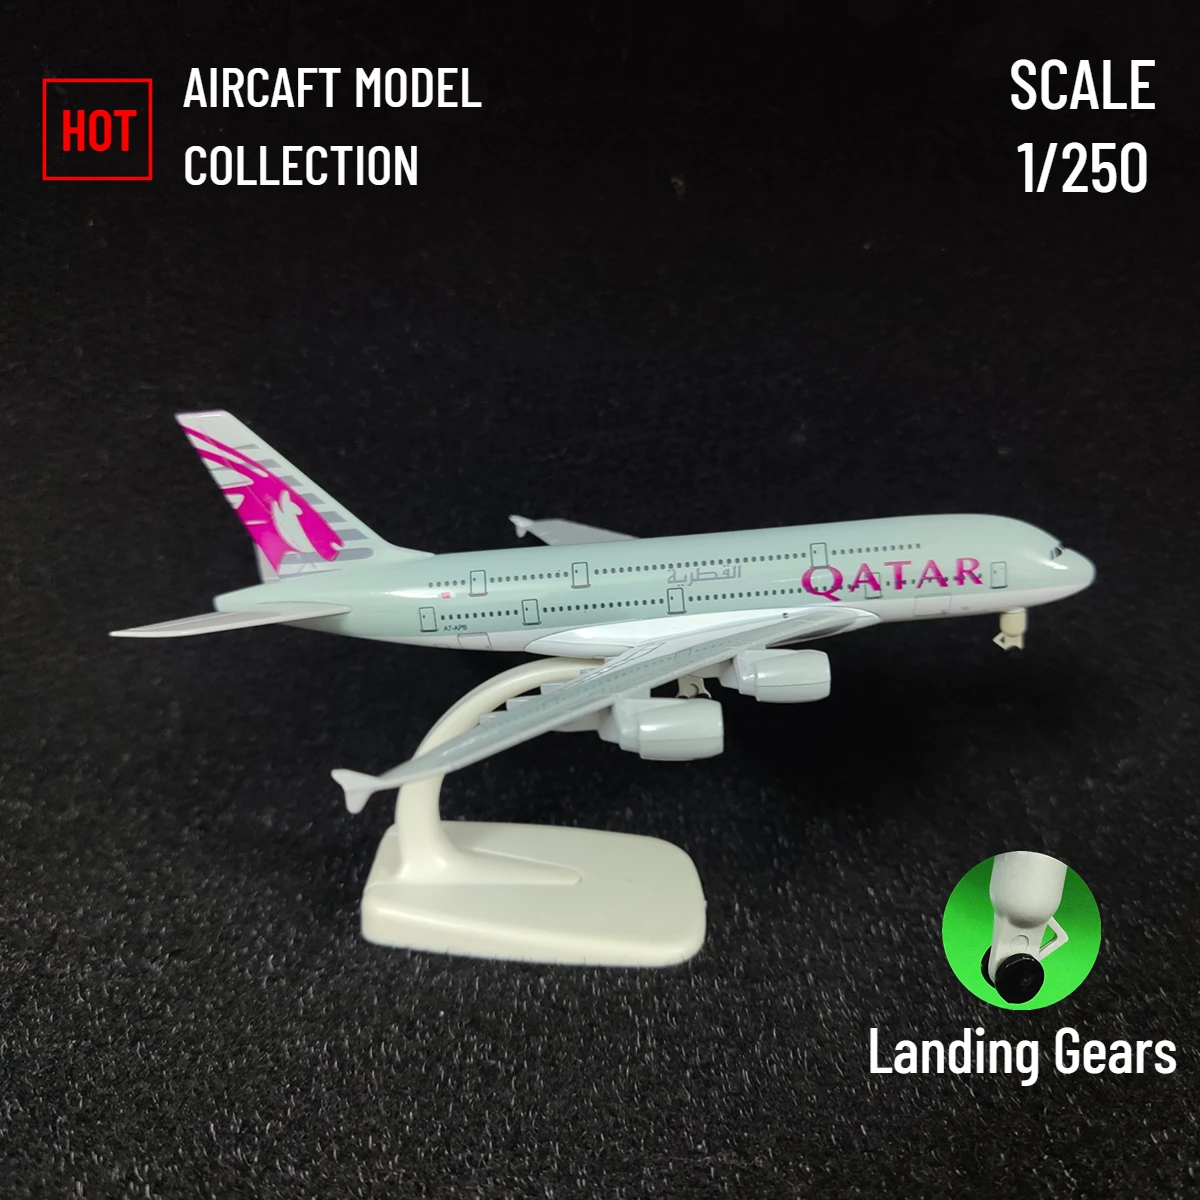 

Scale 1:250 Metal Airplane Model 20cm, Qatar A380 Aviation Miniature Aircraft Replica, Office Decor Kids Gift Toy for Boy